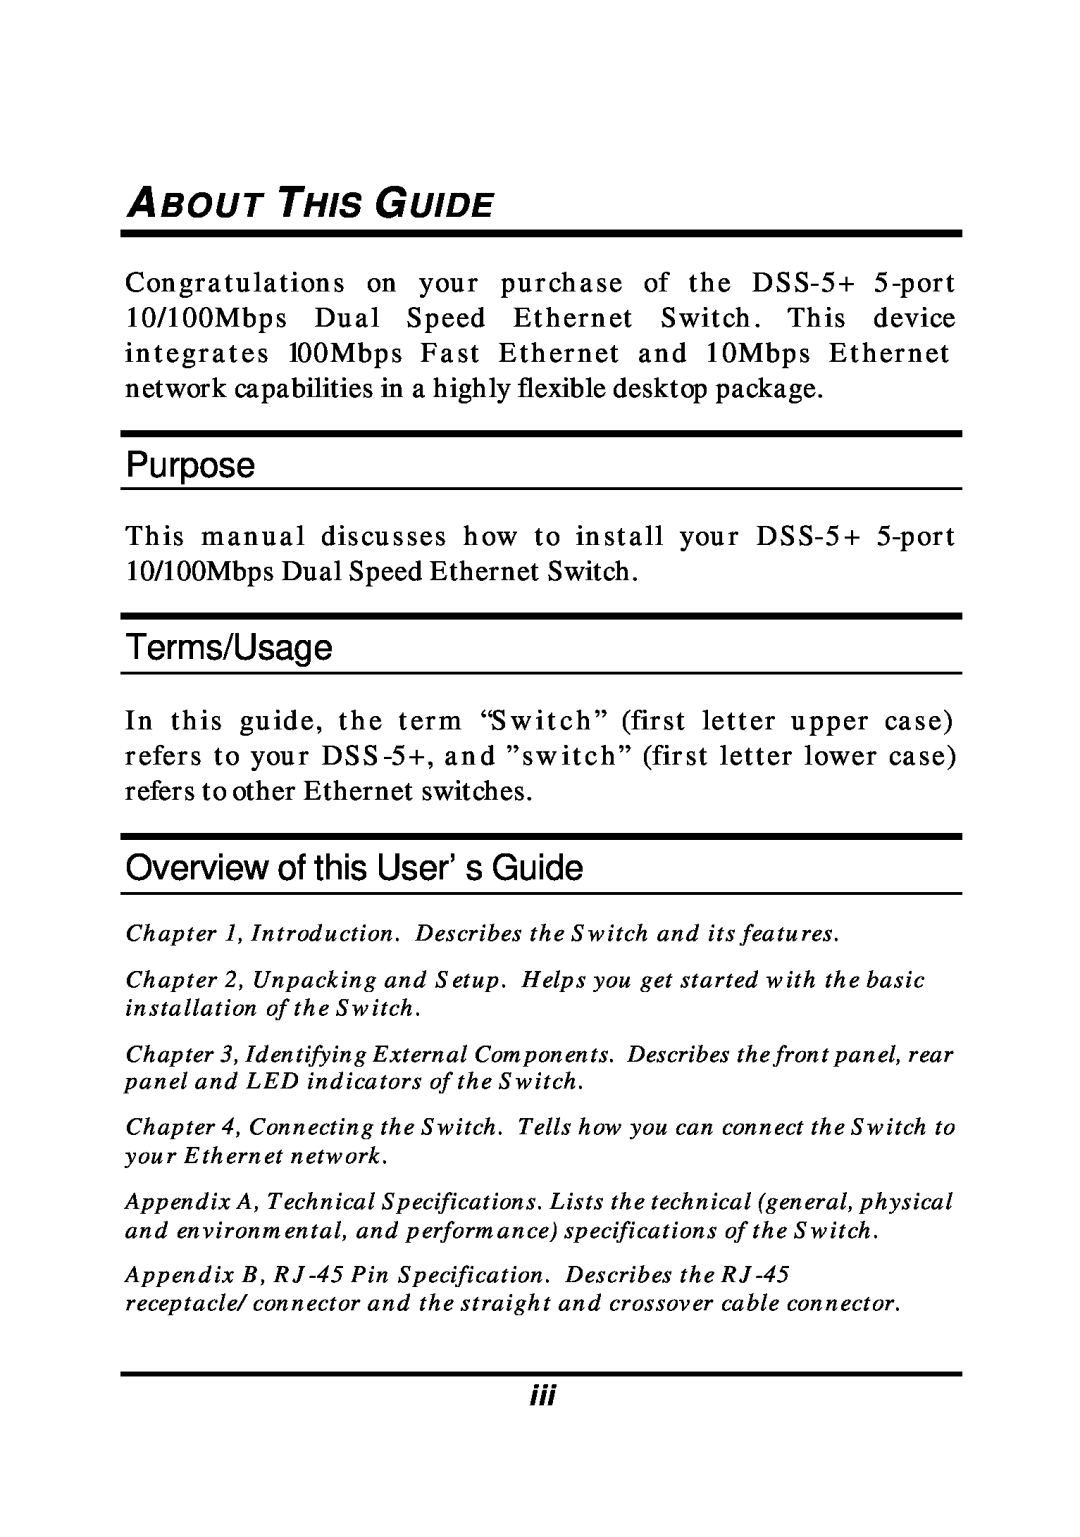 D-Link DES-1005D manual Purpose, Terms/Usage, Overview of this User’s Guide, About This Guide 